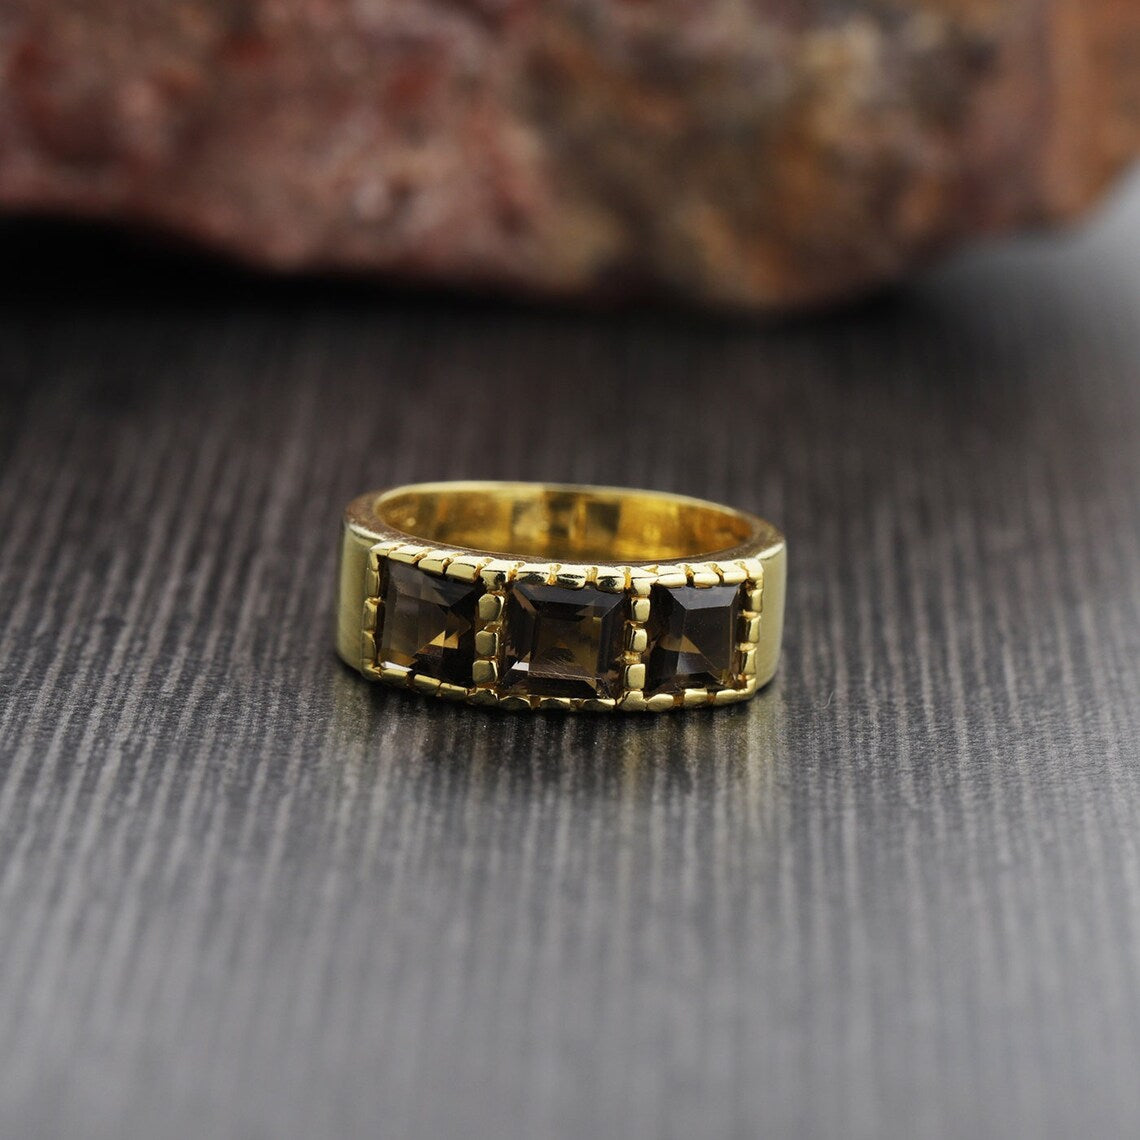 Smoky Quartz Gold Plated Ring, Smoky Quartz Sterling Silver Gold Plated Band Ring